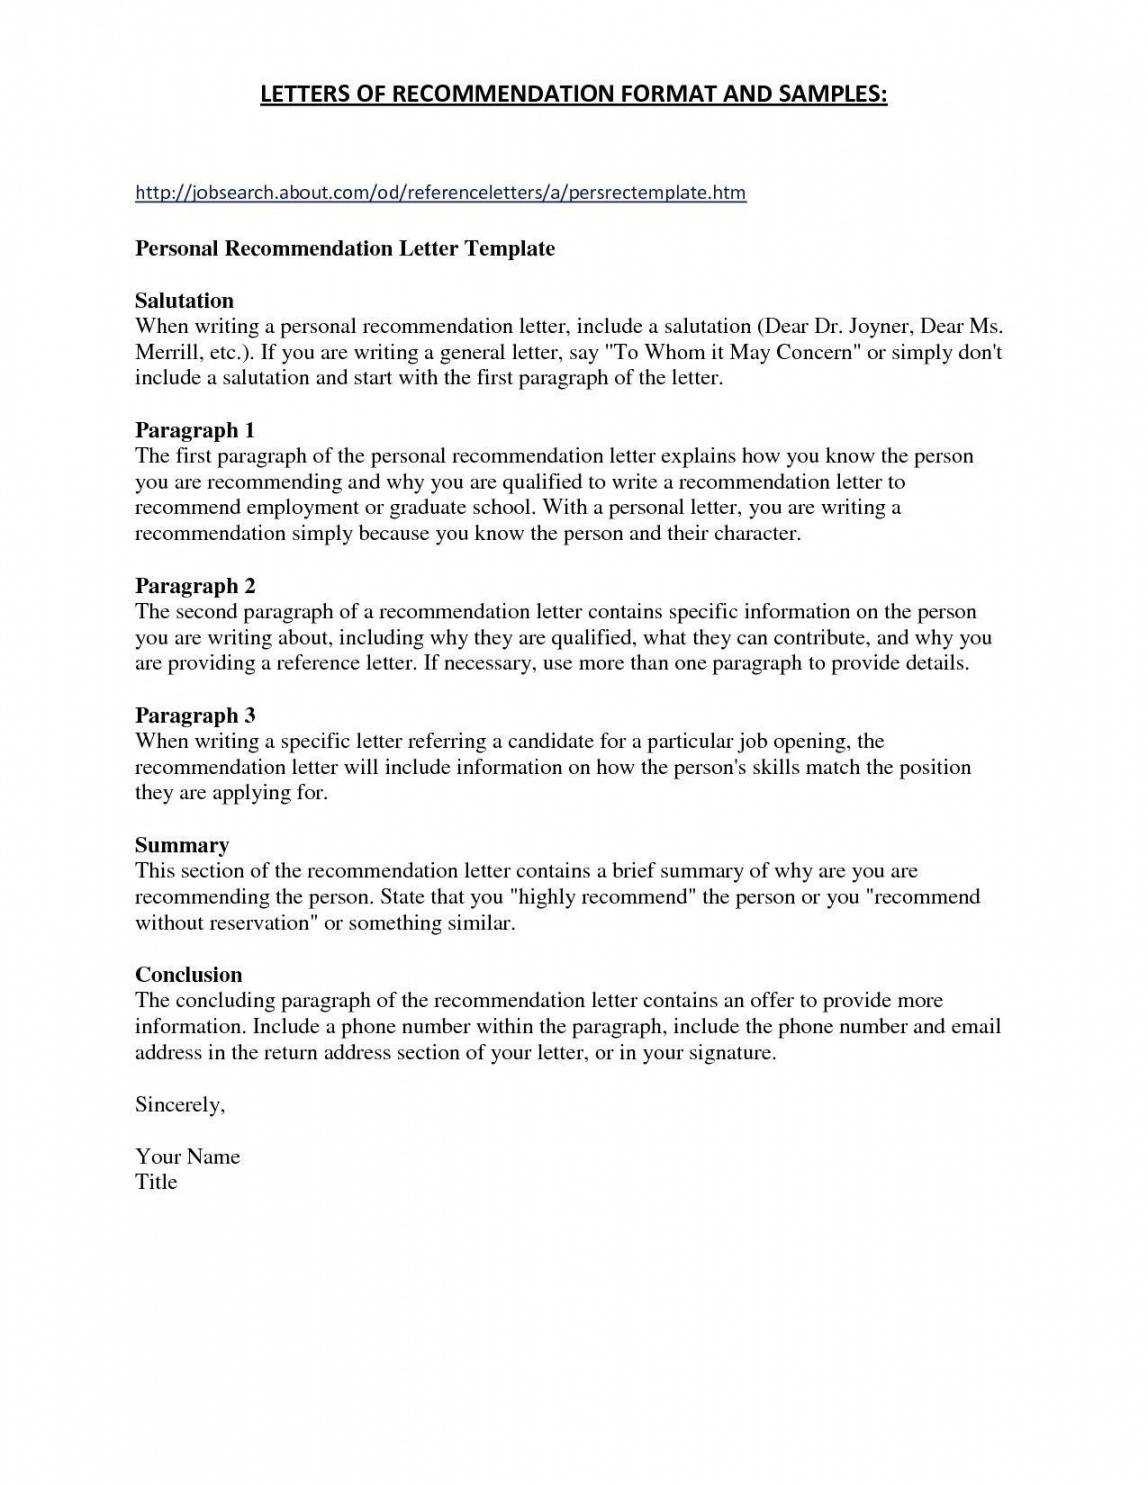 Sample Template For Letter Of Recommendation Collection Within Recommendation Report Template